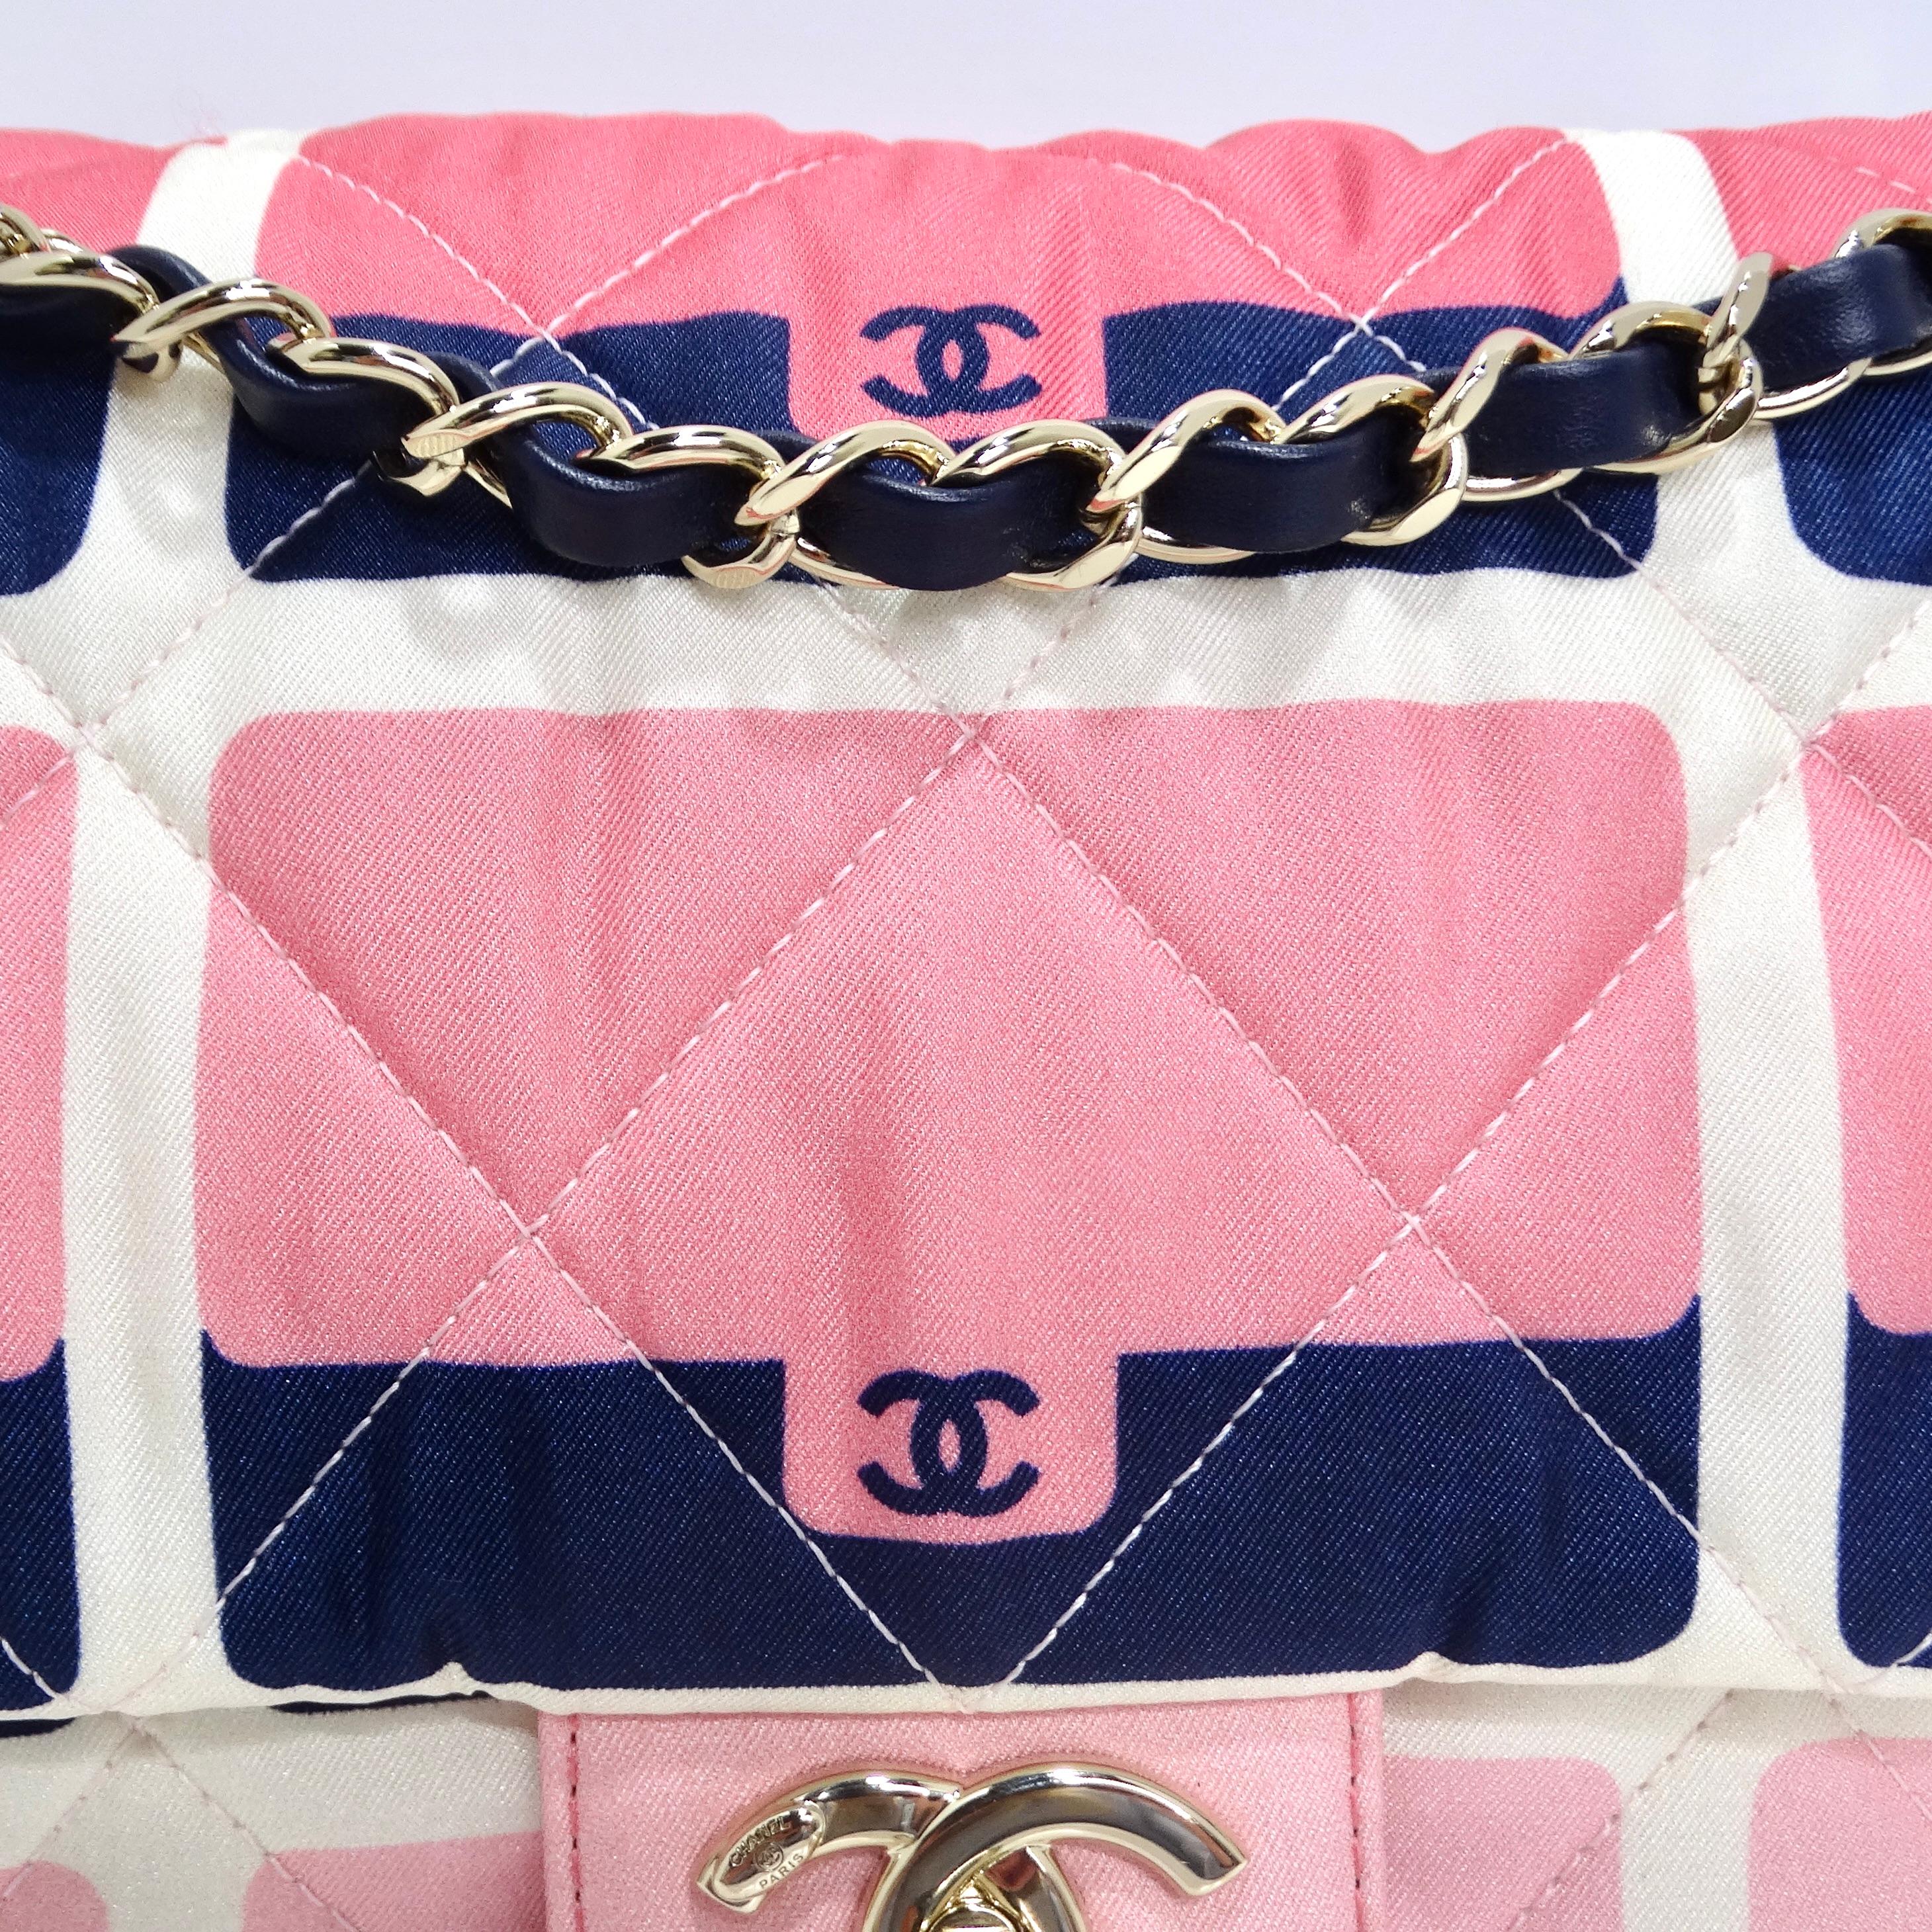 Chanel 2021 Jumbo Print Graphic Pink Black Quilted Flap Shoulder Bag In Excellent Condition For Sale In Scottsdale, AZ